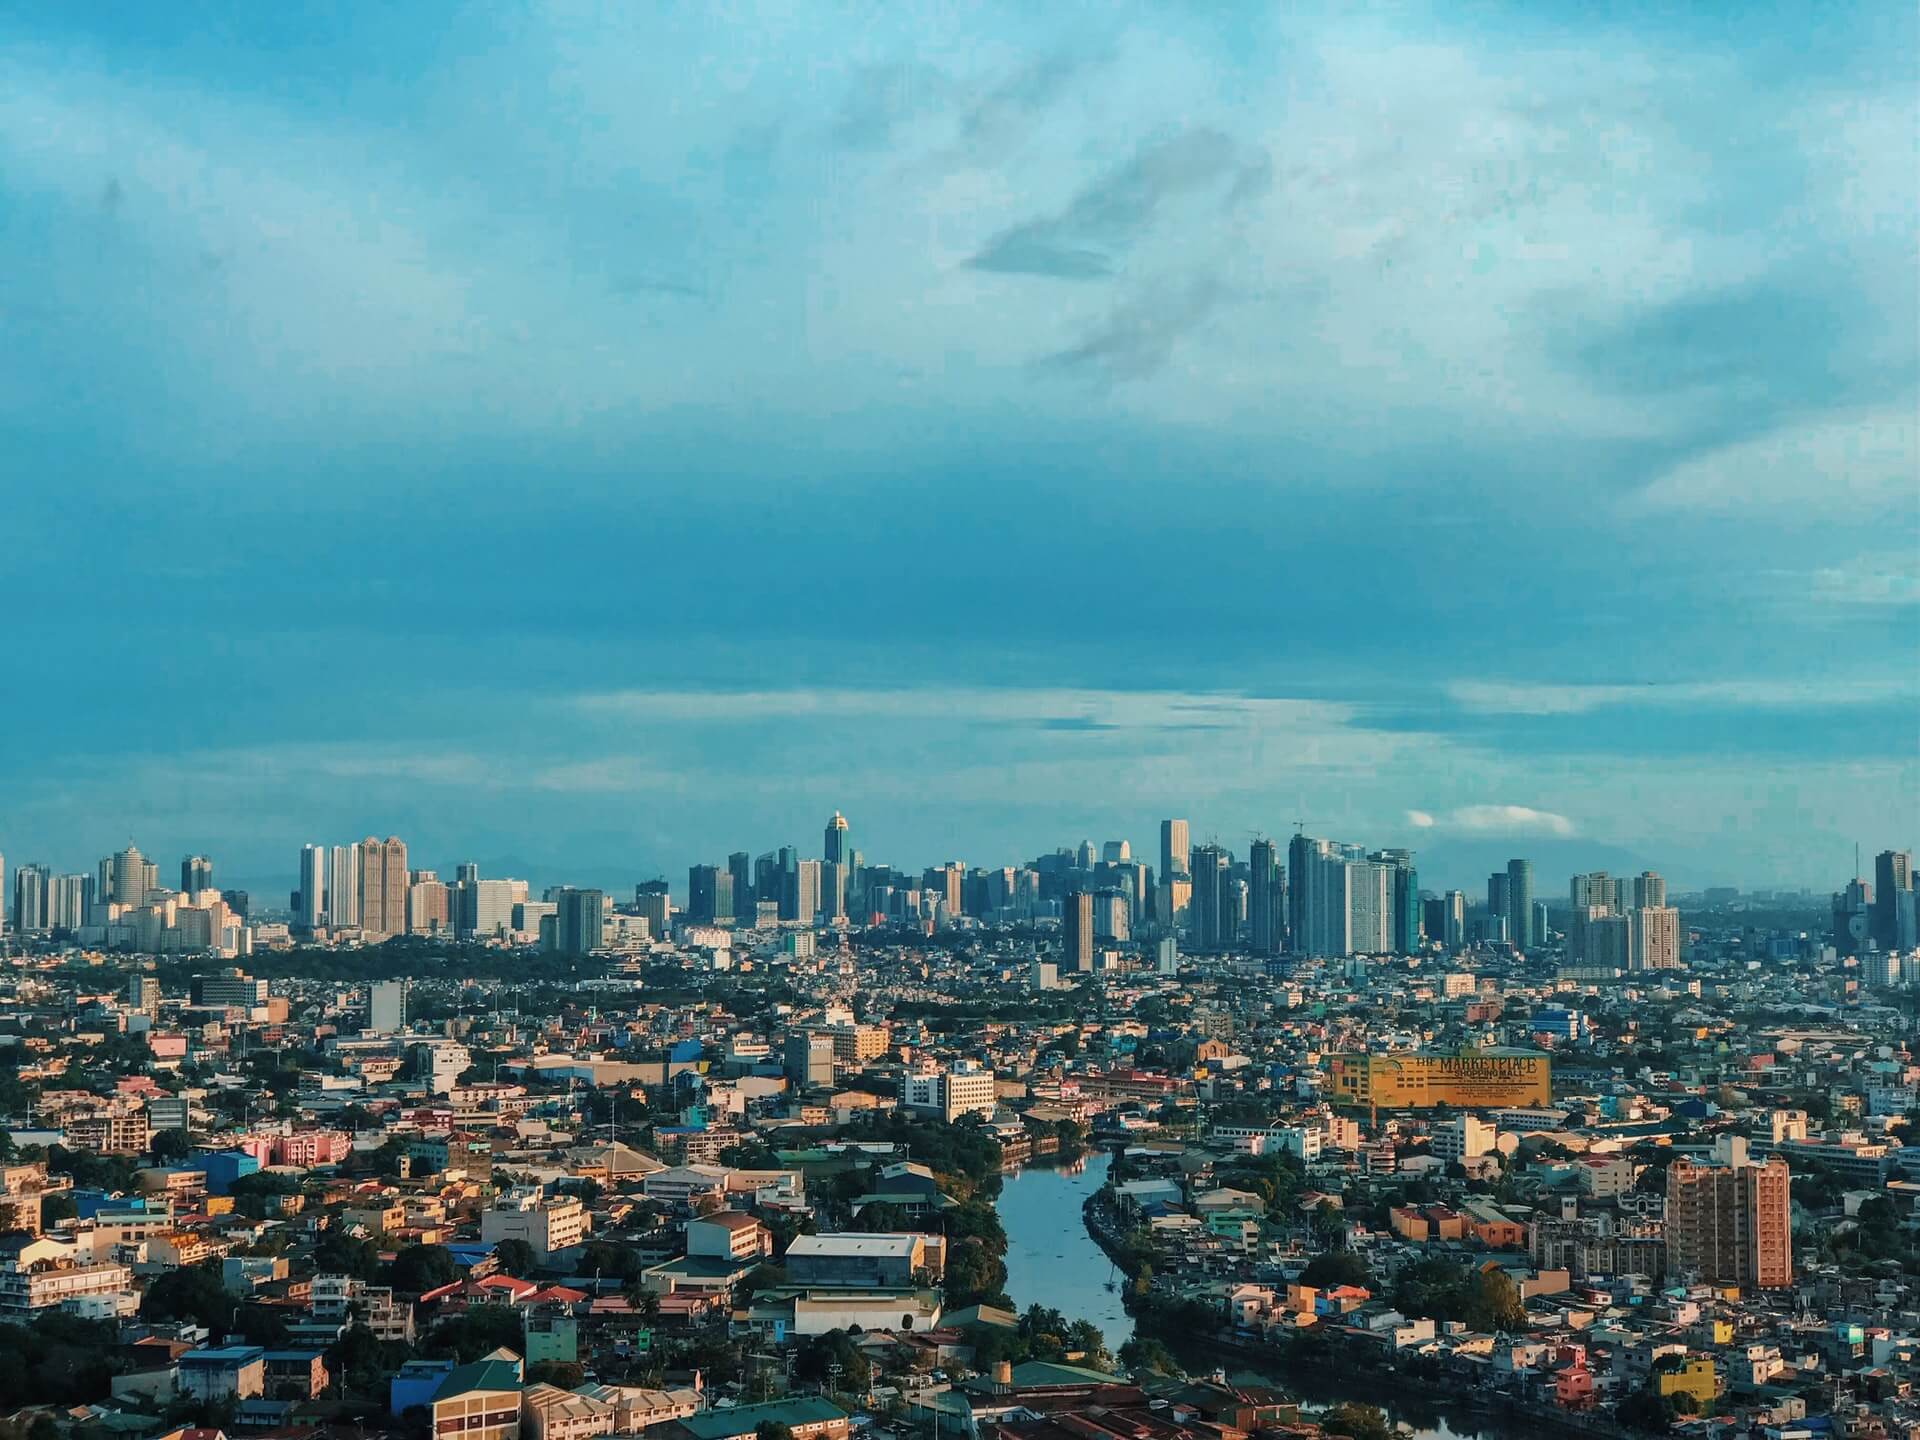 Is the Philippines a good market for real estate investments